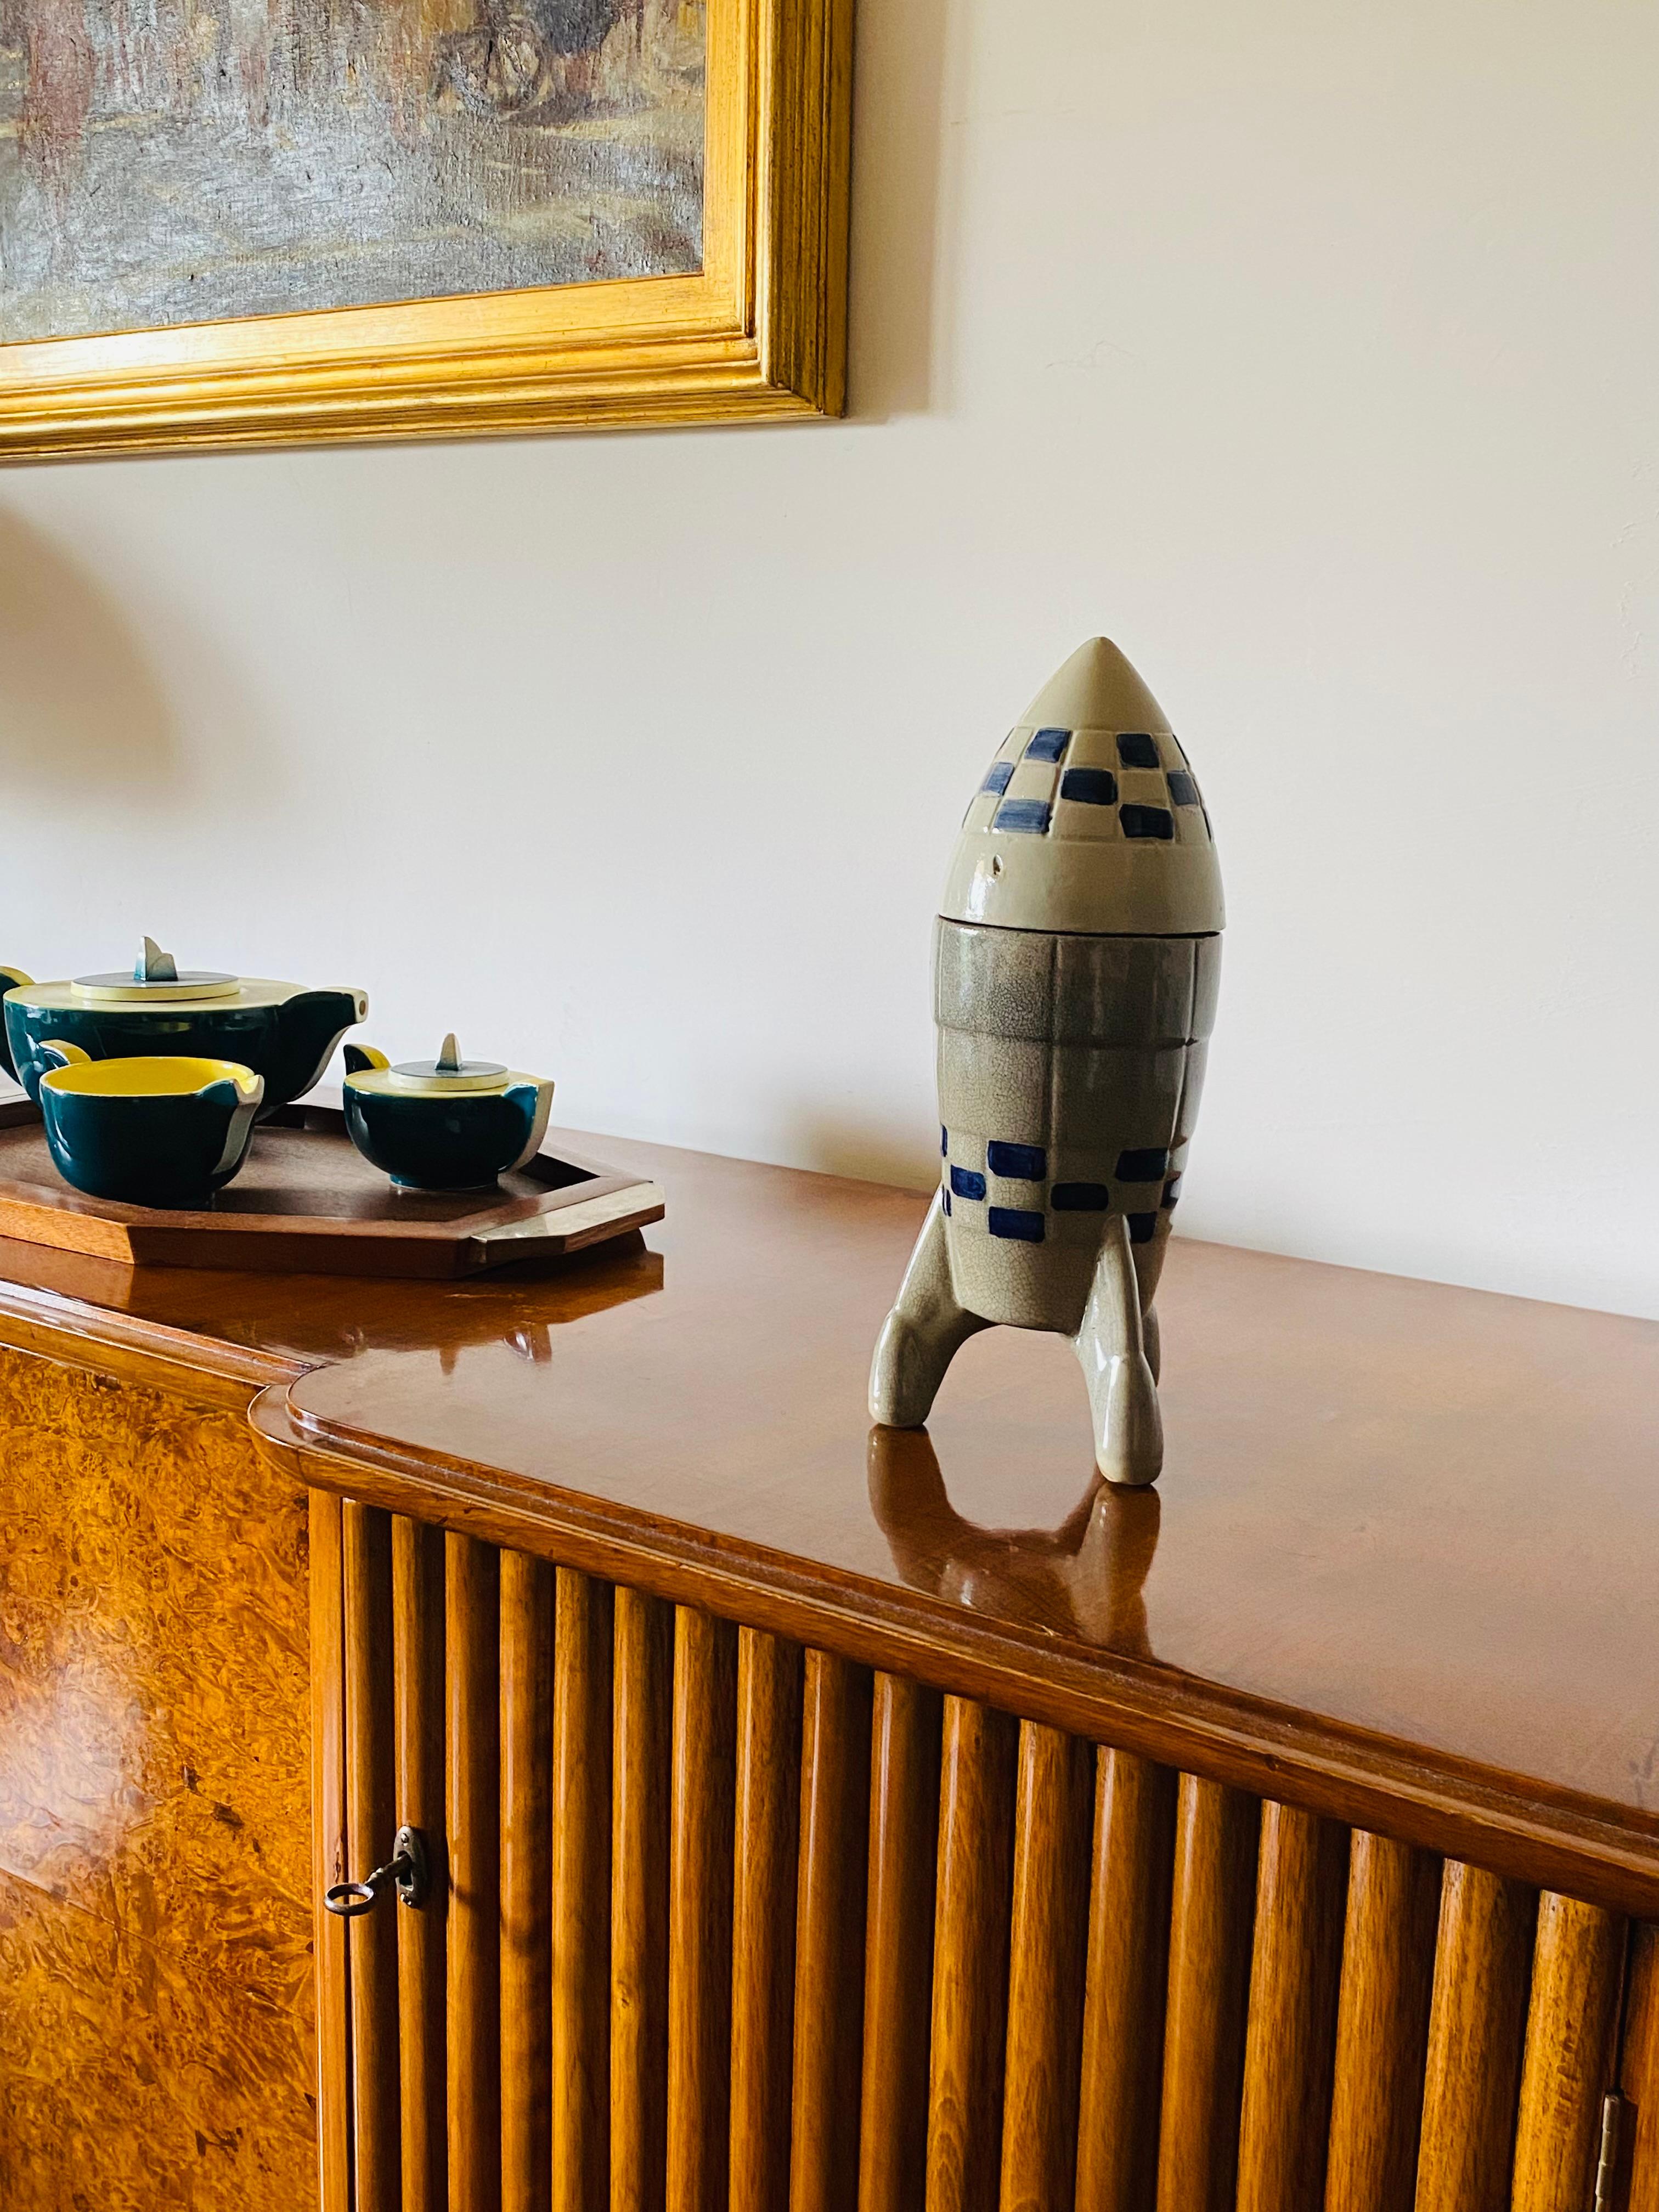 French Ceramic Rocket / Spaceship Bottle / Decanter, France, 1940s-1950s For Sale